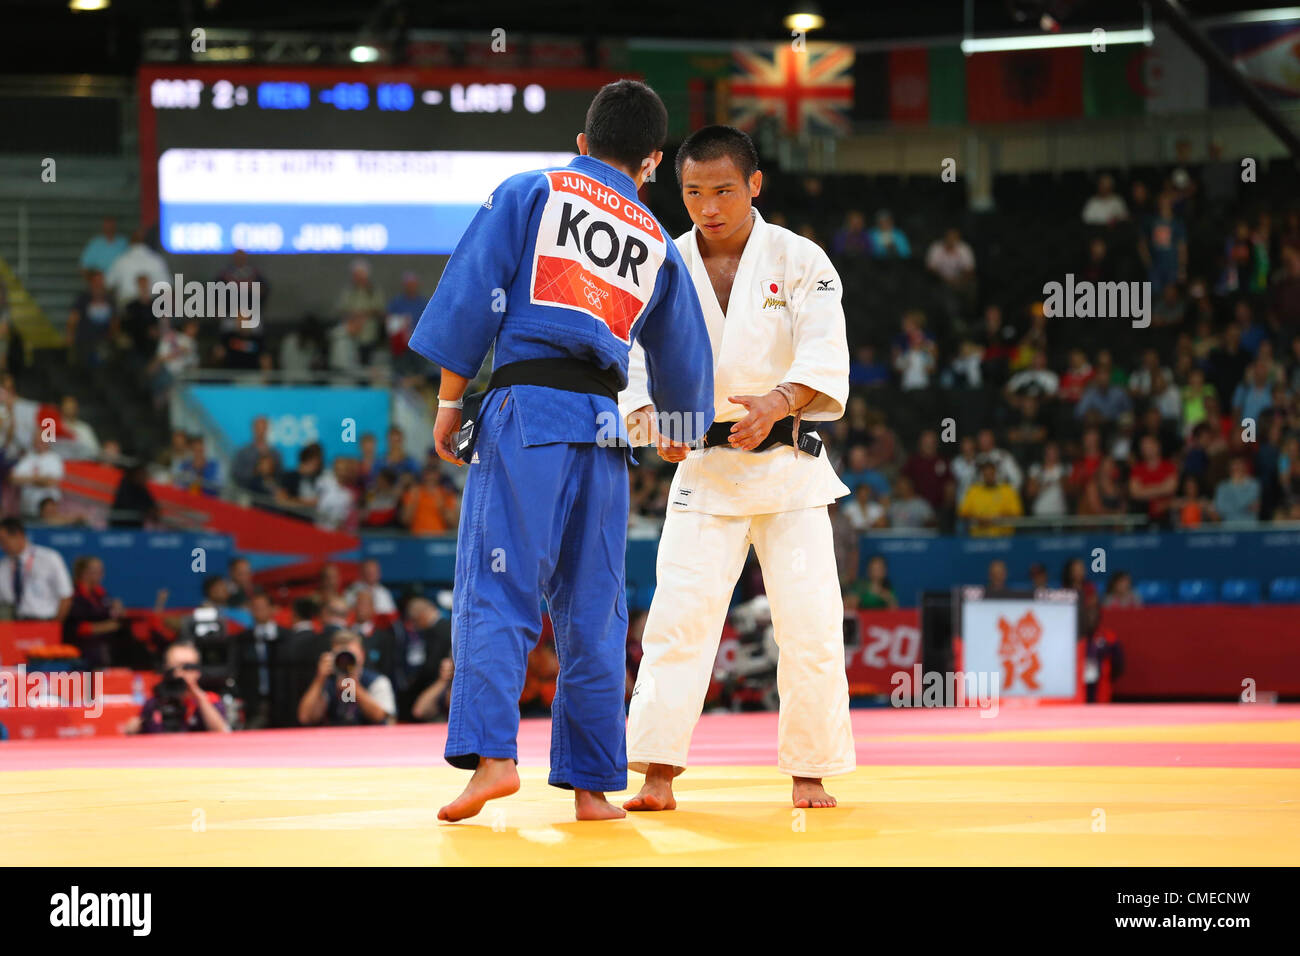 (L to R) Cho Jun Ho (KOR), Masashi Ebinuma (JPN),  JULY 29, 2012 - Judo :  Men's -66kg Quarter-final  at ExCeL  during the London 2012 Olympic Games The match ended with bizarre scenes as originally the three judges on the mat all rose blue flags to designate Cho as the winner. This resulted in booing from the crowd and the International Judo Federation's Refeering Commission called over the three judges to speak with them. They then returned to the mat and all three raised white flags to designate Ebinuma as the winner. Both judokas later ended up taking the two bronze medals available in the Stock Photo